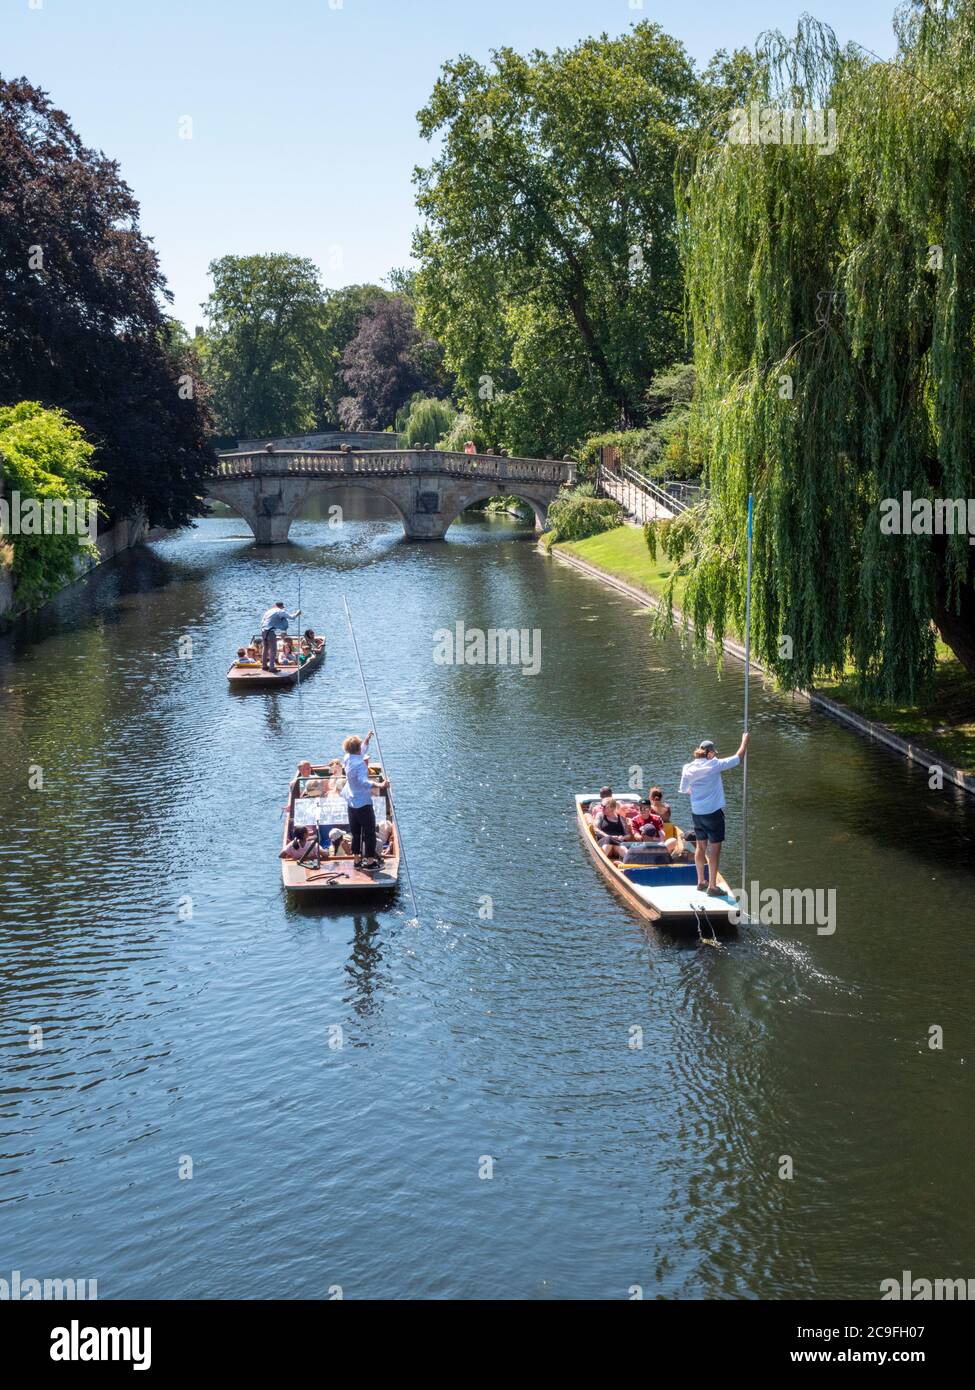 Cambridge UK 31st July 2020. People enjoy punting on the River Cam on the  hottest day of the year so far in the UK. Temperatures are forecast to  reach 36 degrees centigrade